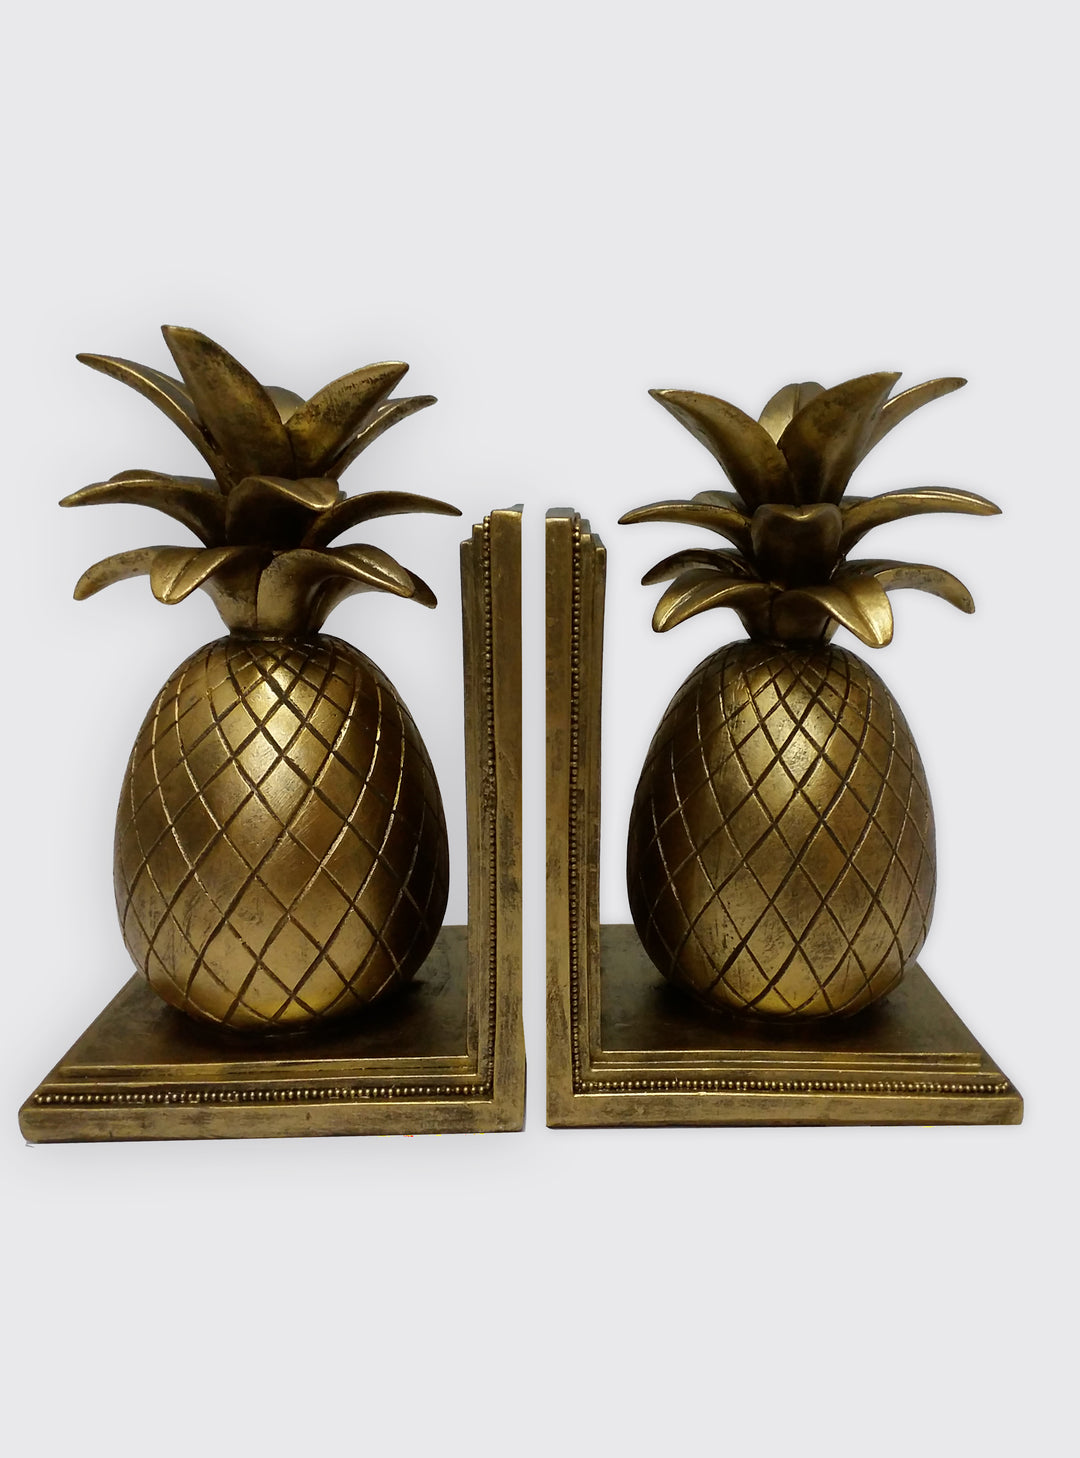 Pineapple Book End - Hollywood Regency - Hawaii Decor - Gold Pineapple Bookends